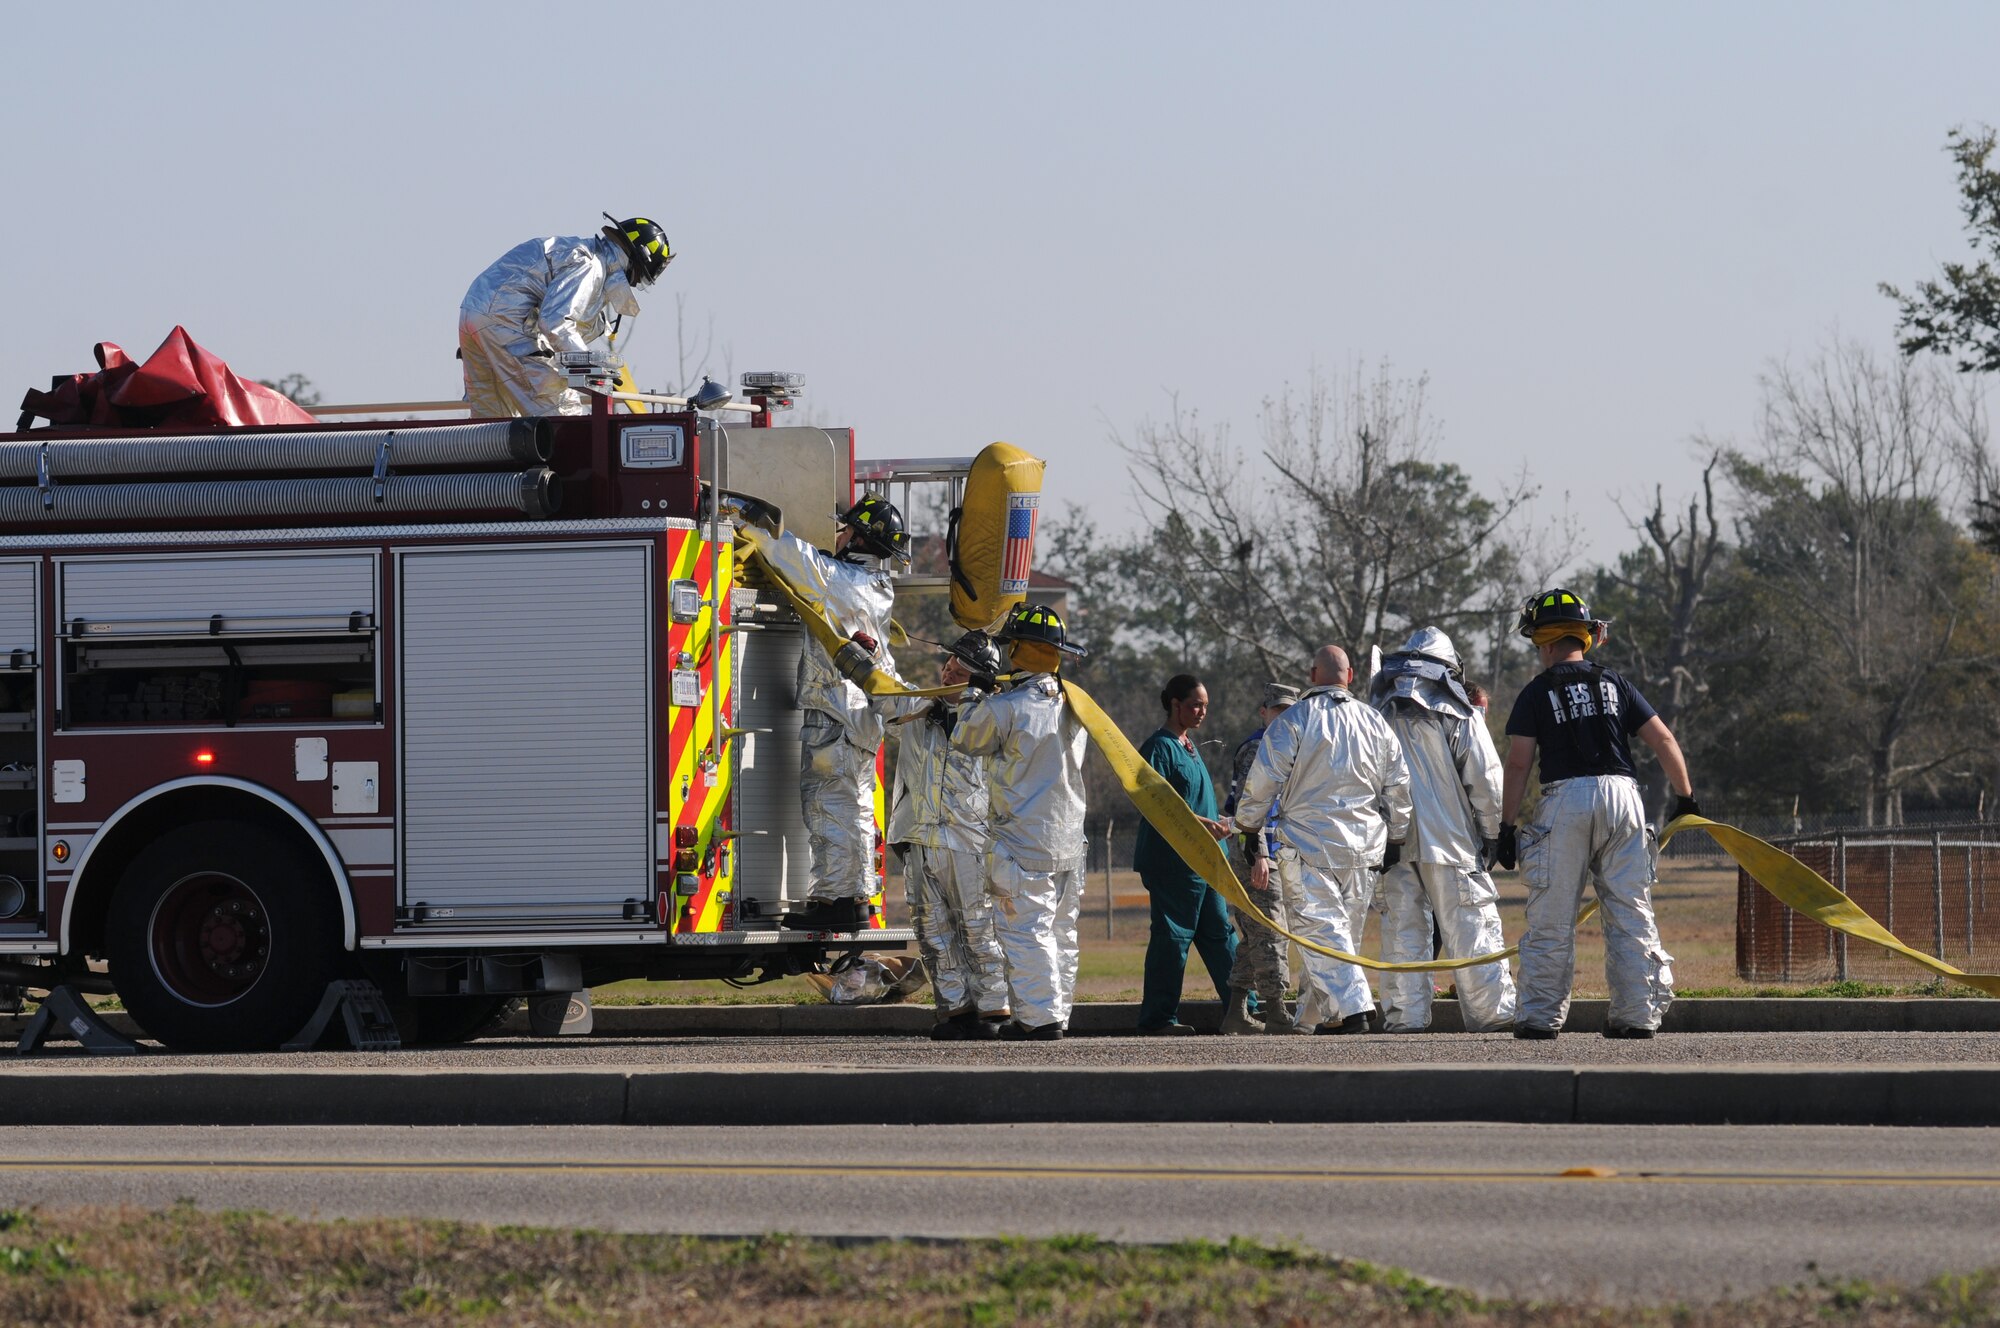 Keesler firefighters load a fire hose on to the truck after responding during a major accident response exercise Feb. 12, 2015, on the flight line, Keesler Air Force Base, Miss.  The MARE simulated a C-130J Hercules aircraft crash on base. The exercise was held to test the readiness of Keesler personnel during a major accident.  (U.S. Air Force photo by Kemberly Groue)